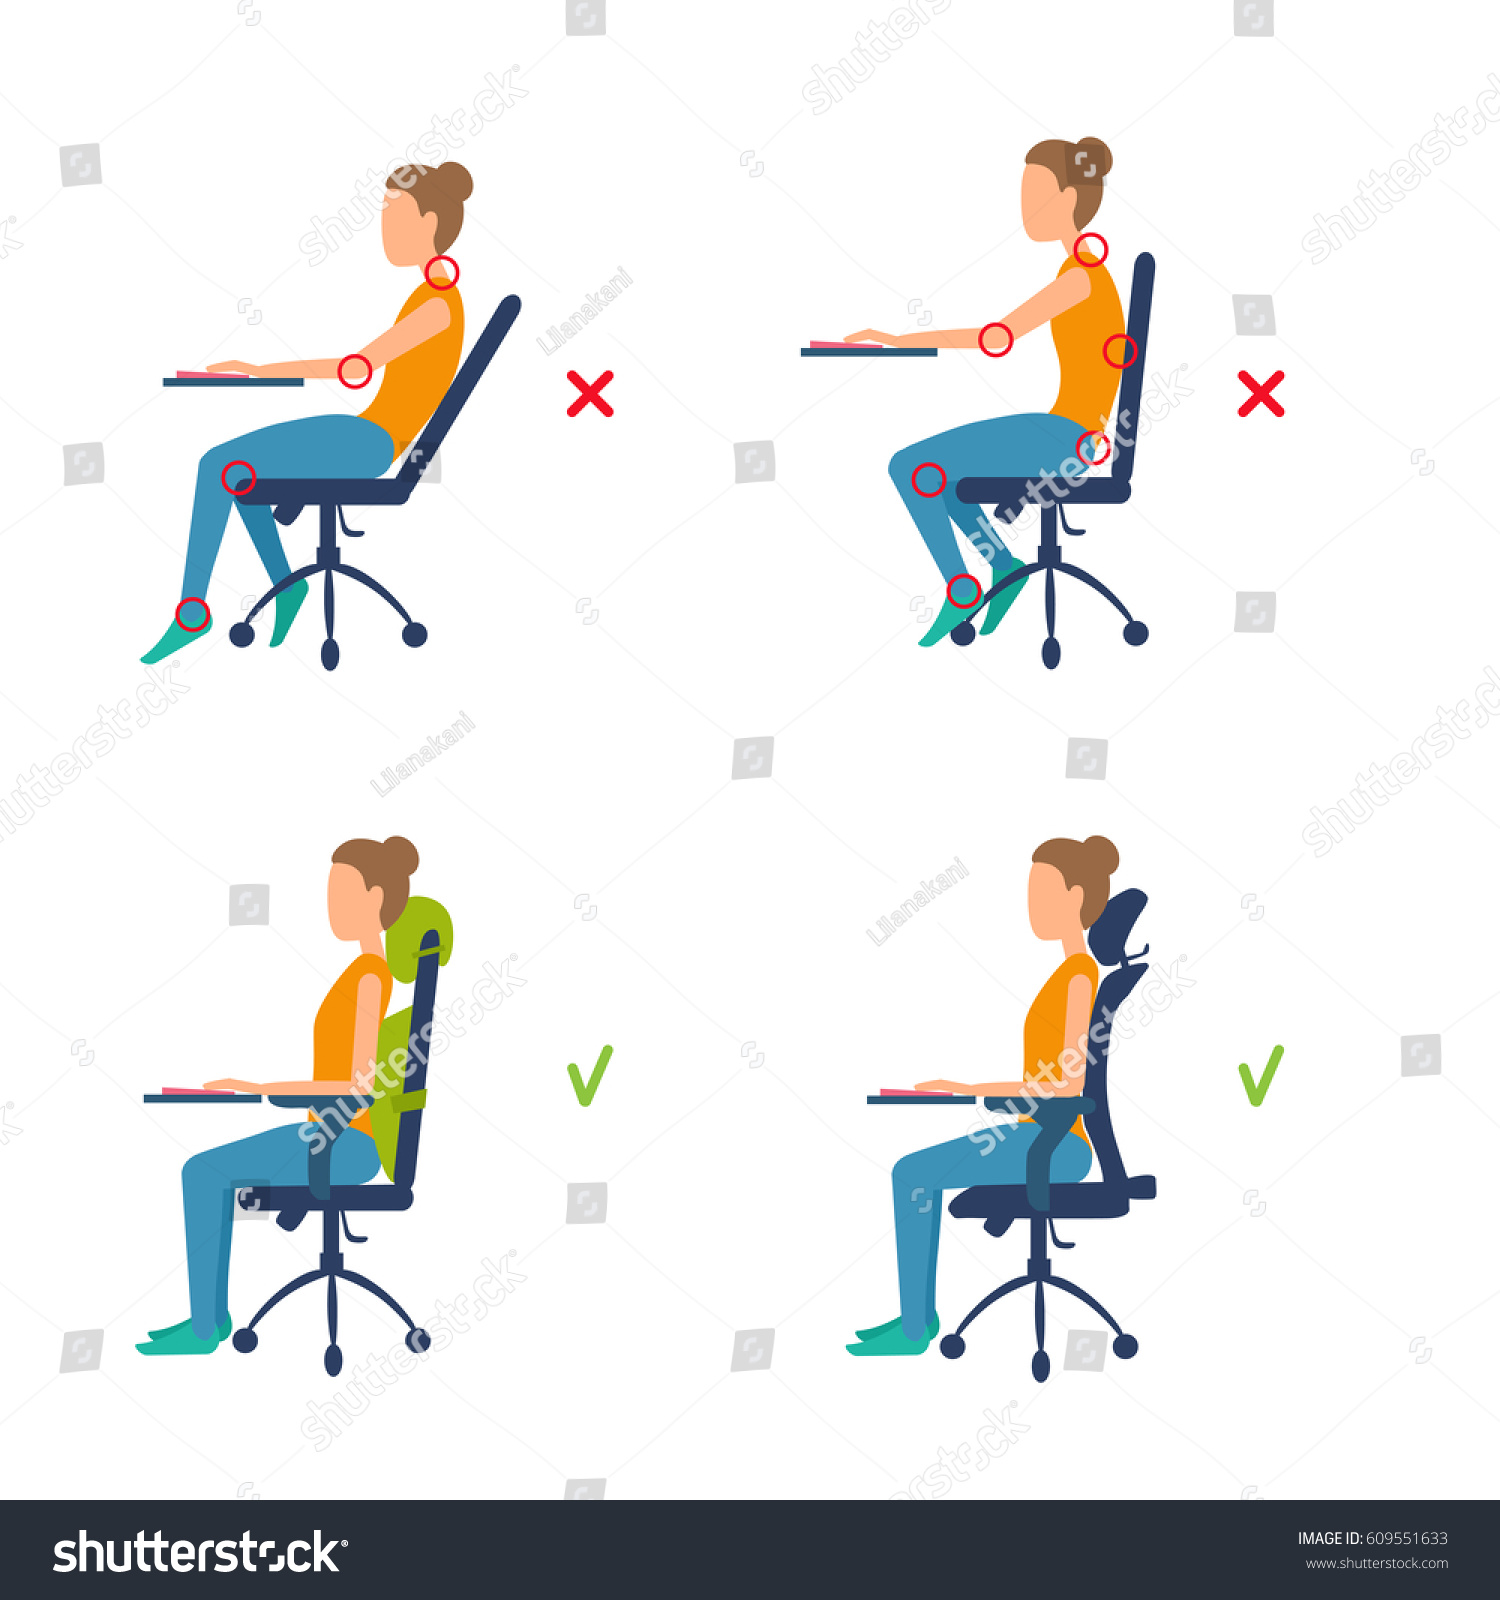 SVG of Correct, incorrect position sitting at table. Marks of pain in joints, muscles. Ergonomic orthopaedic pillow under lower back and neck. Right posture for a healthy back. Vector illustration isolated. svg